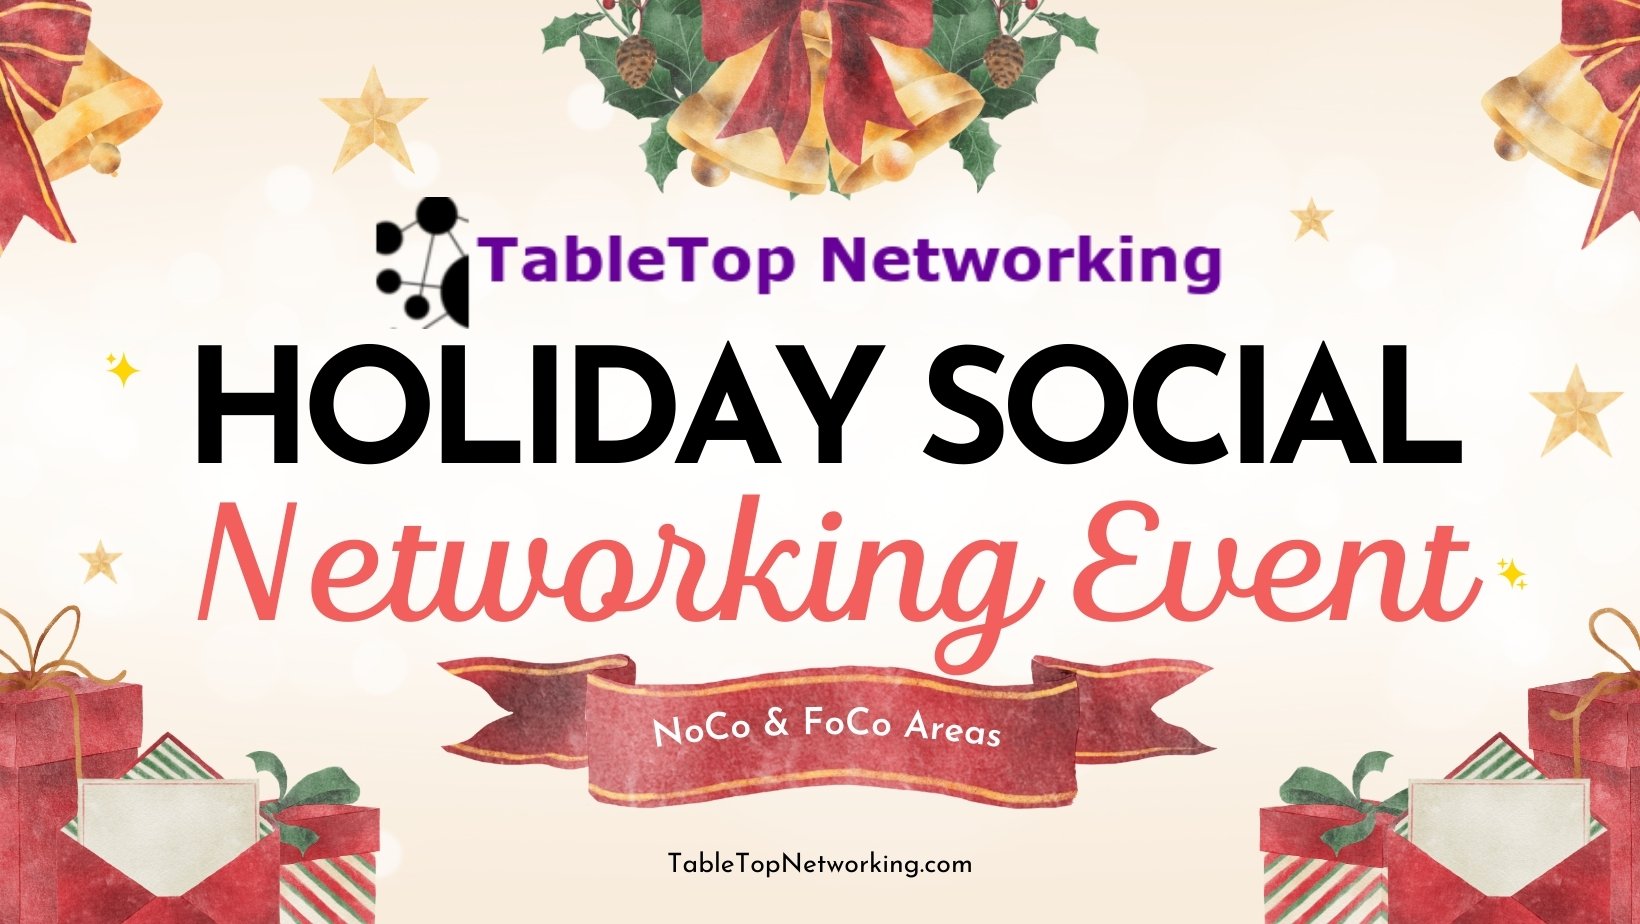 December Social Event for NoCo and Foco Area Chapters of TableTop Networking